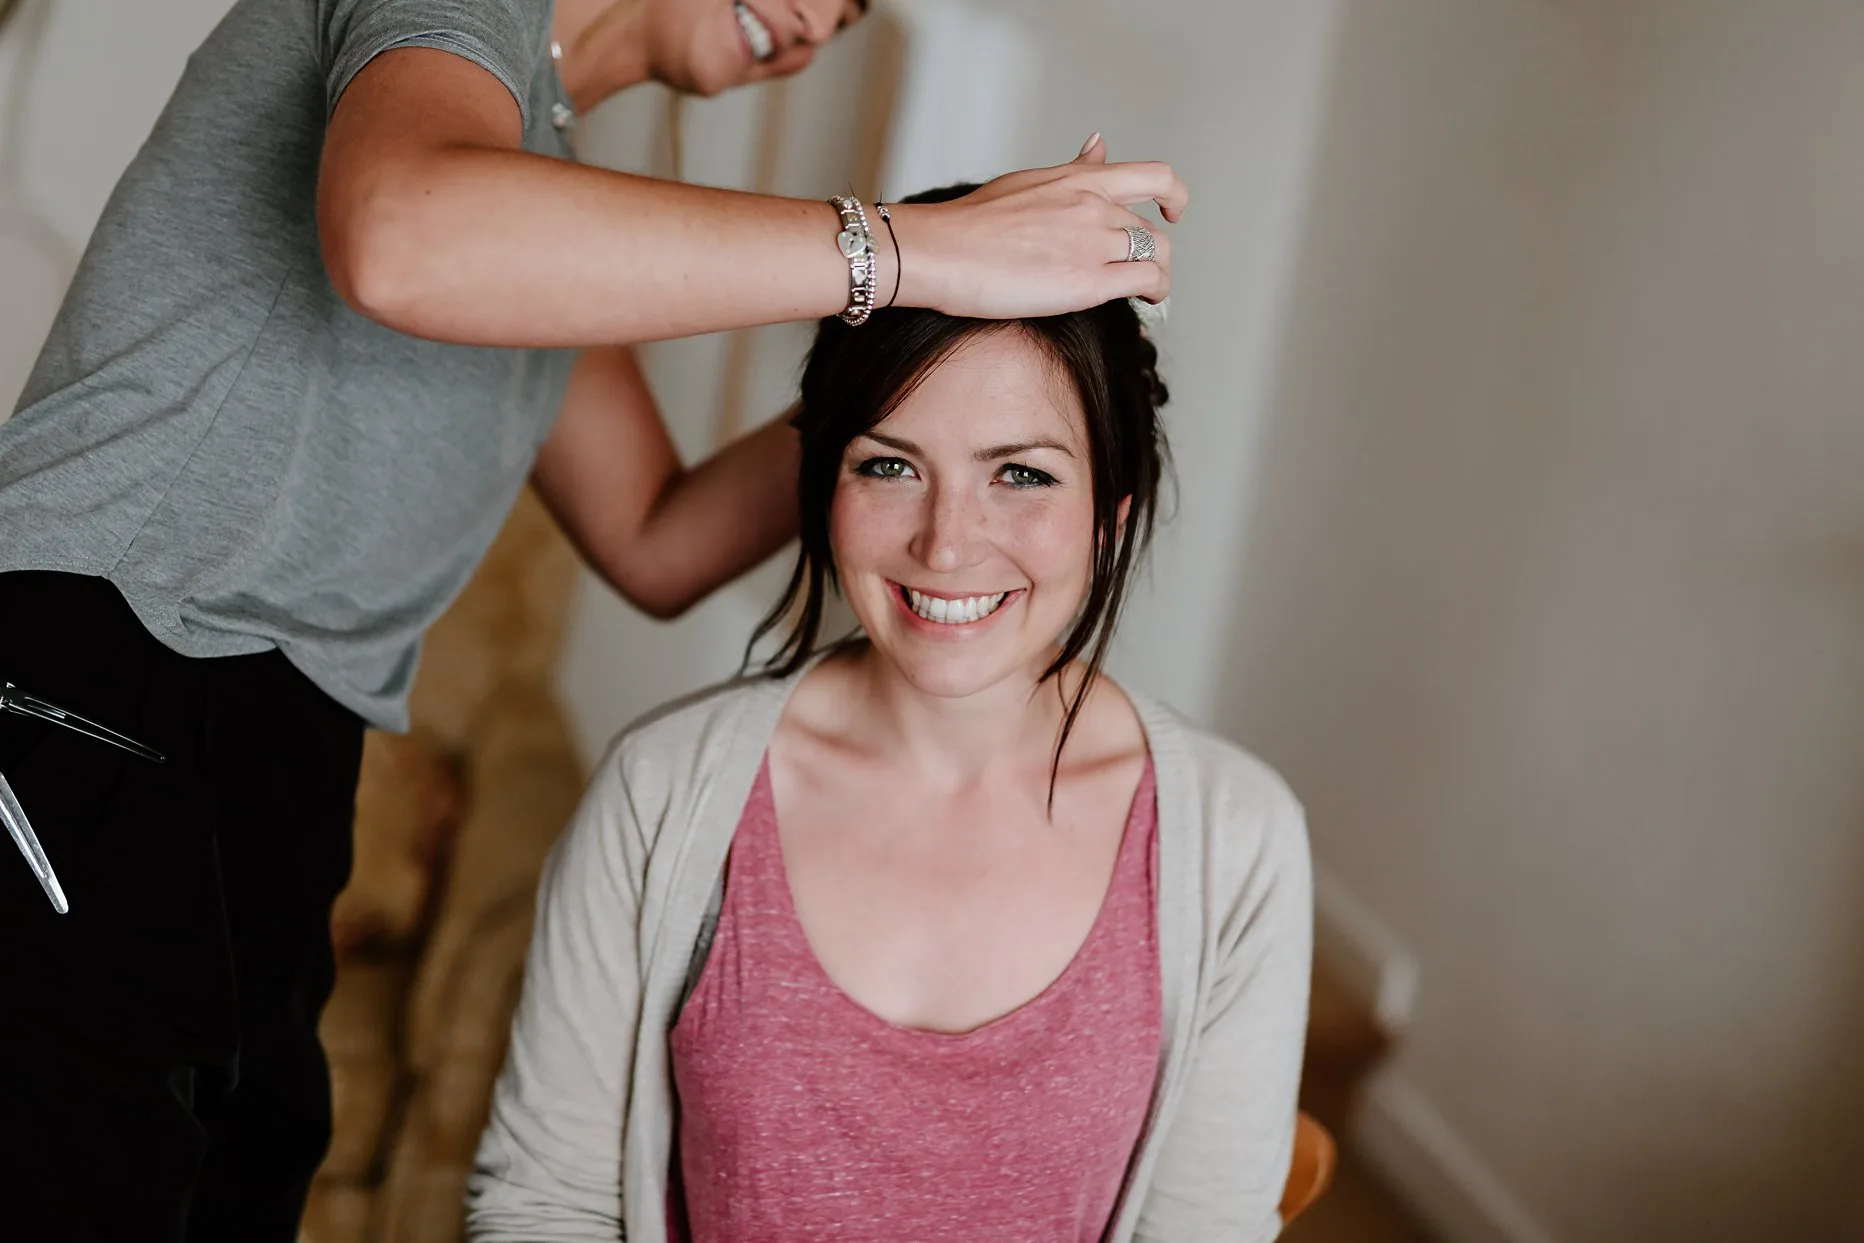 Bride having her hair done on the morning of her wedding. Bride is looking at the camera smiling whilst the hairdresser is placing pins in her hair.